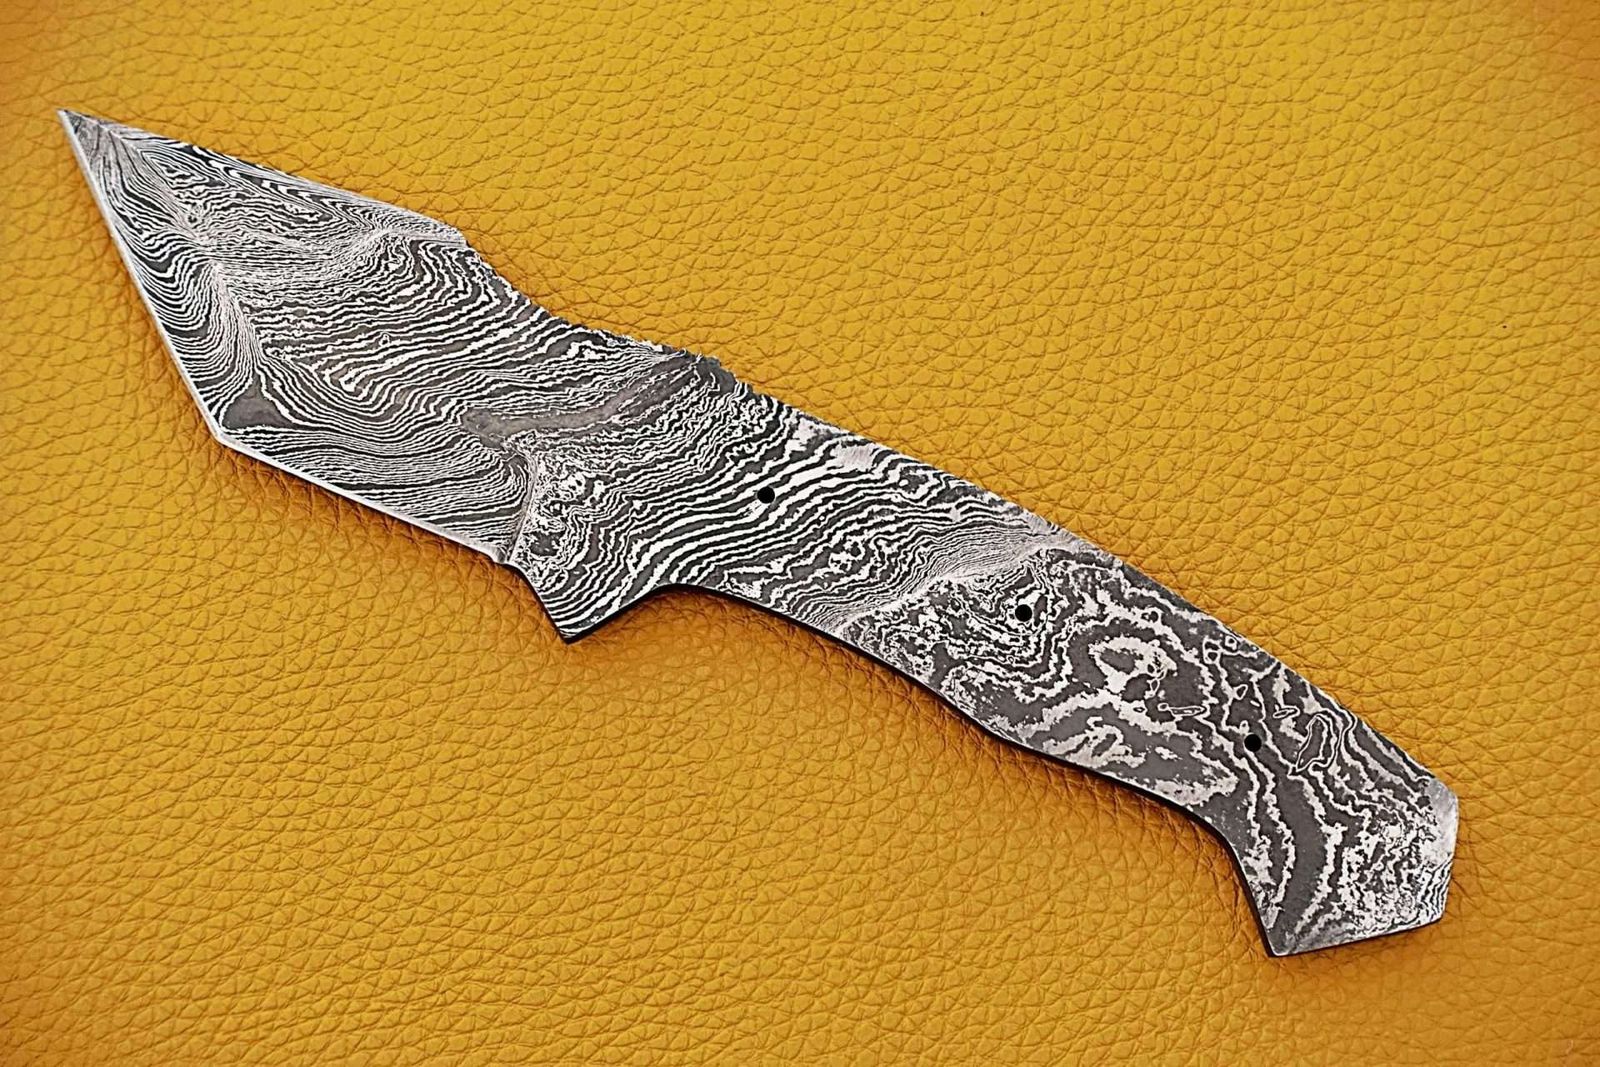 Knife Making Supplies, Damascus Steel Blank Blade 9.5 inches Long